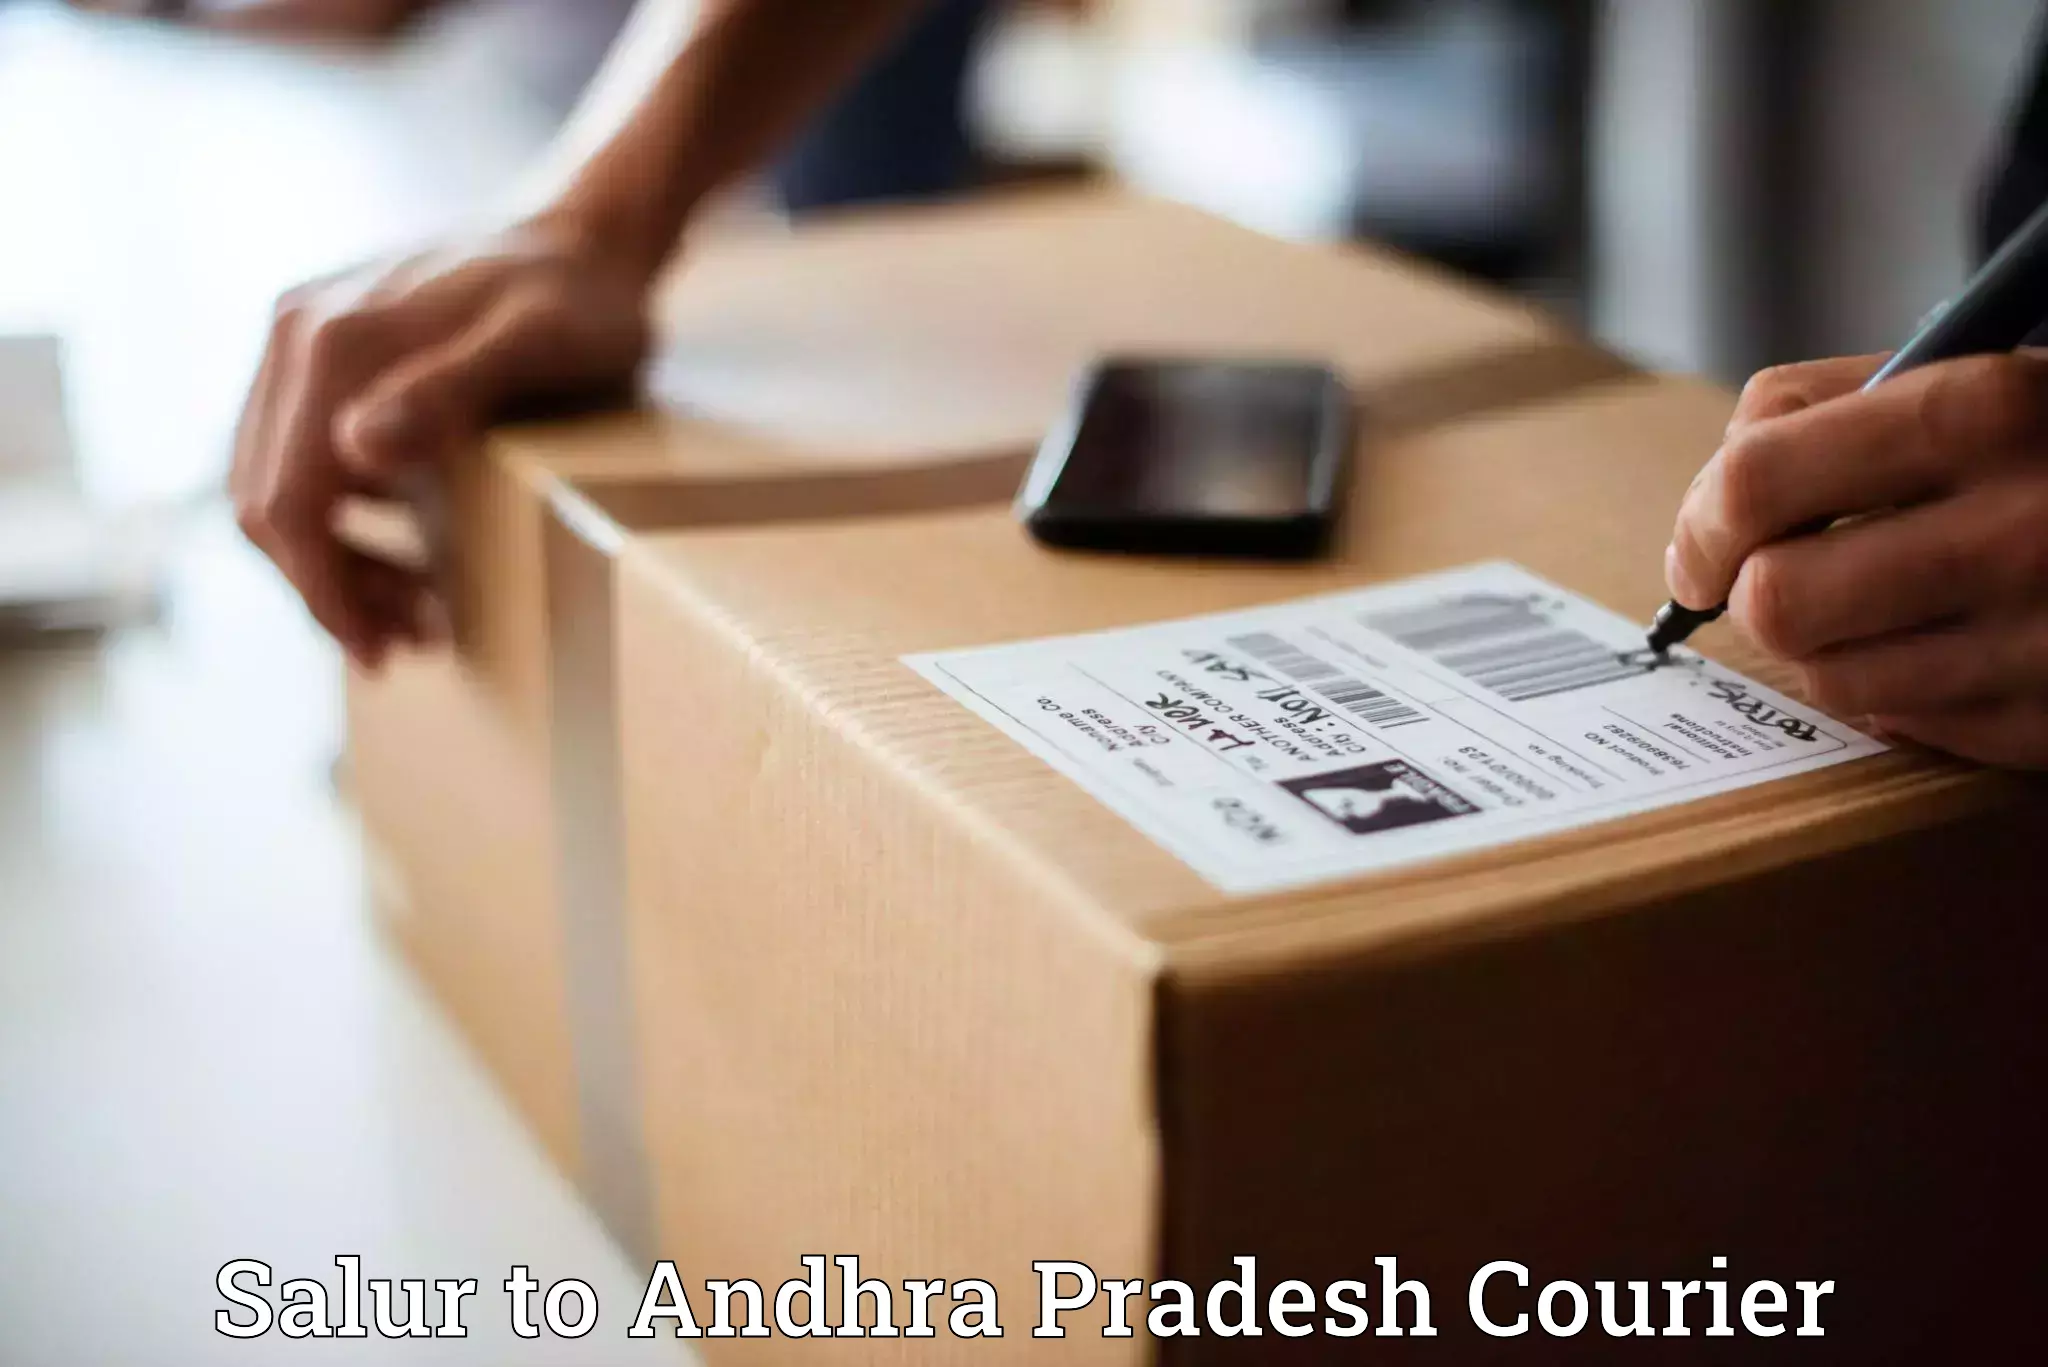 Quality courier services Salur to Chodavaram